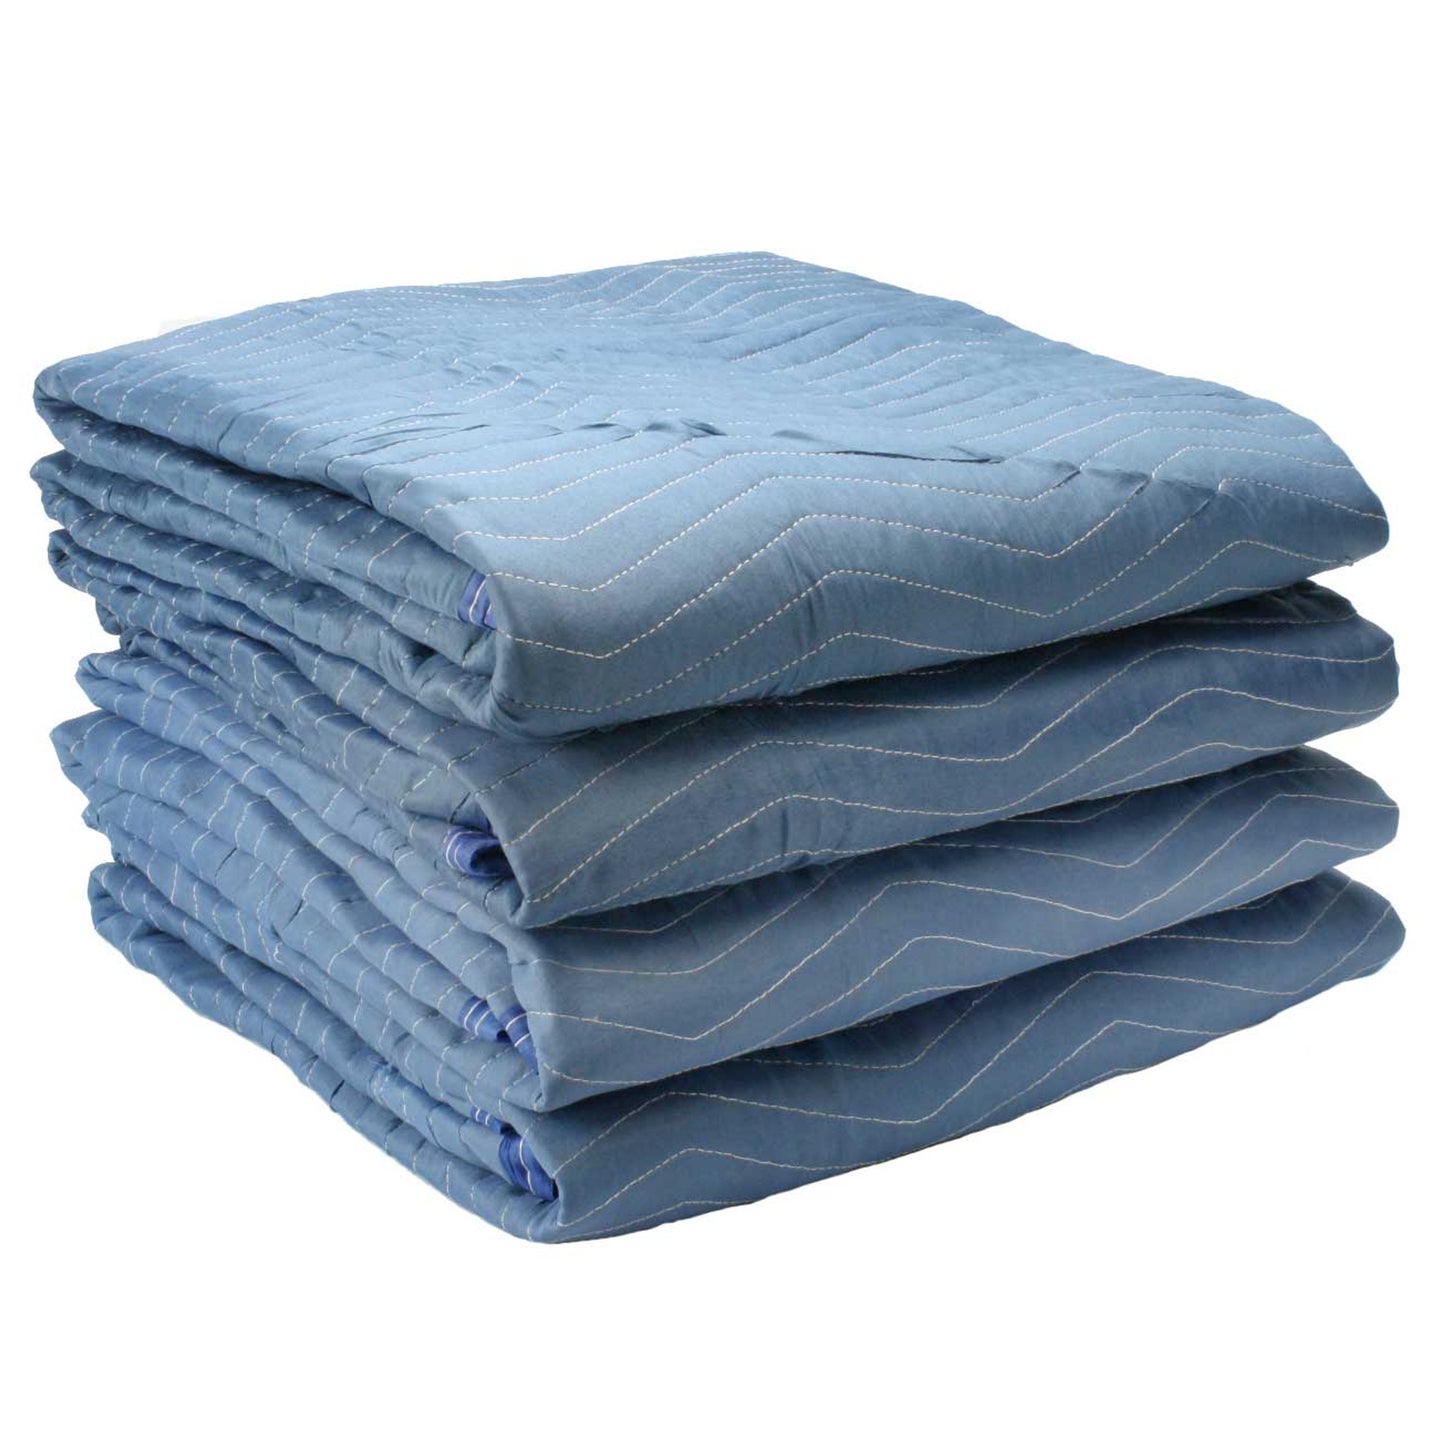 Moving Blankets- Pro Mover 4-Pack image 1 of 11